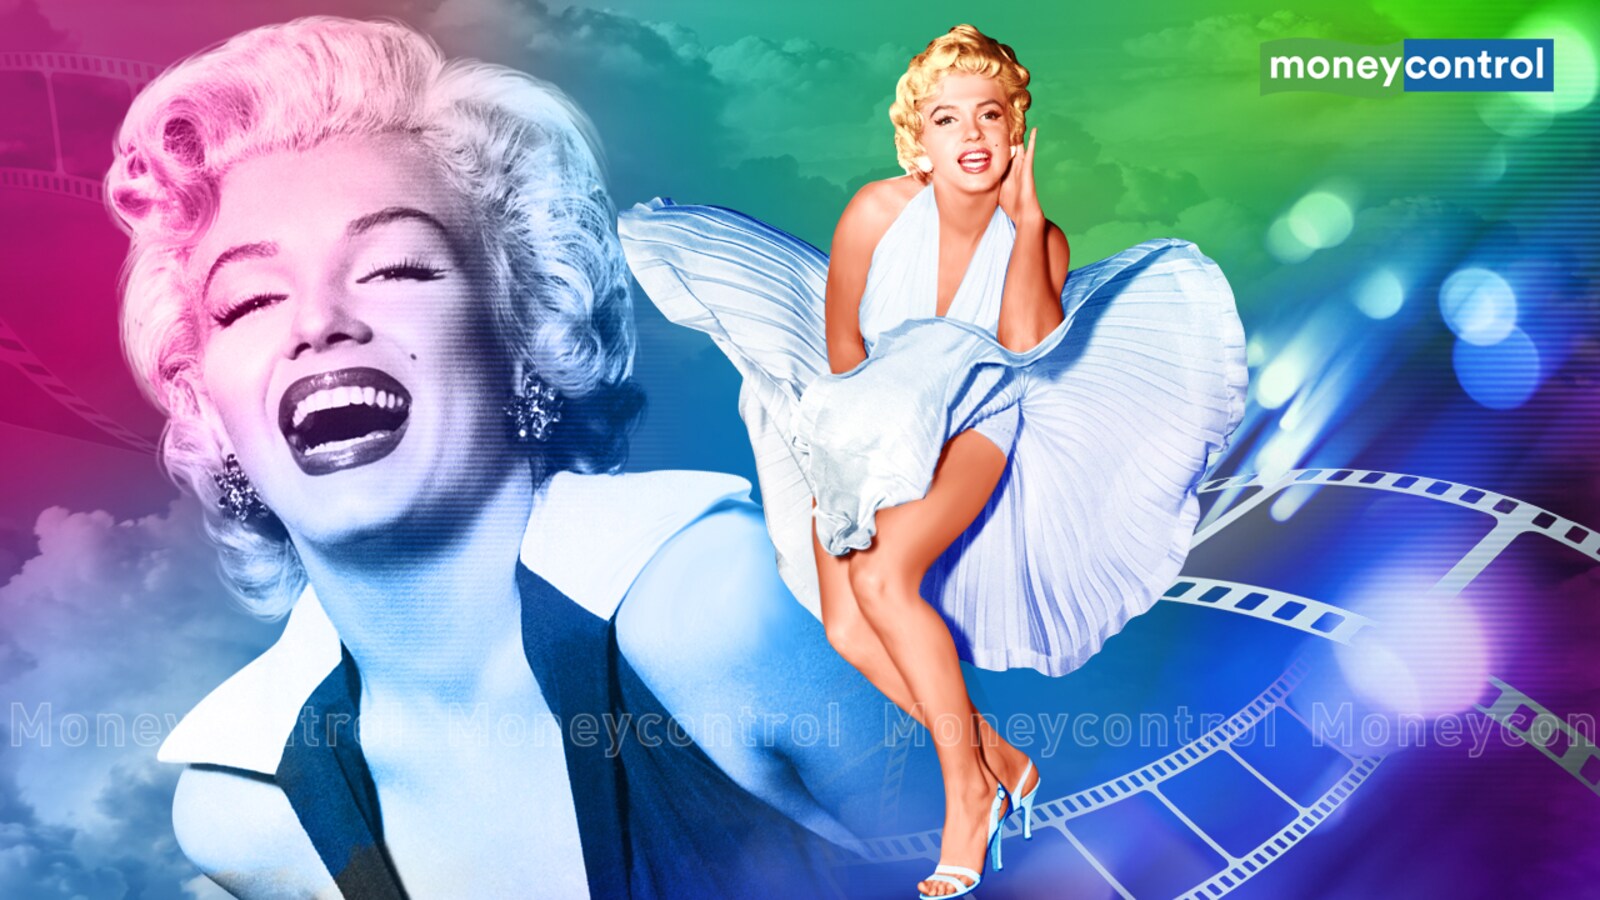 https://images.moneycontrol.com/static-mcnews/2022/04/Marilyn-Monroe-illustration.jpg?impolicy=website&width=1600&height=900